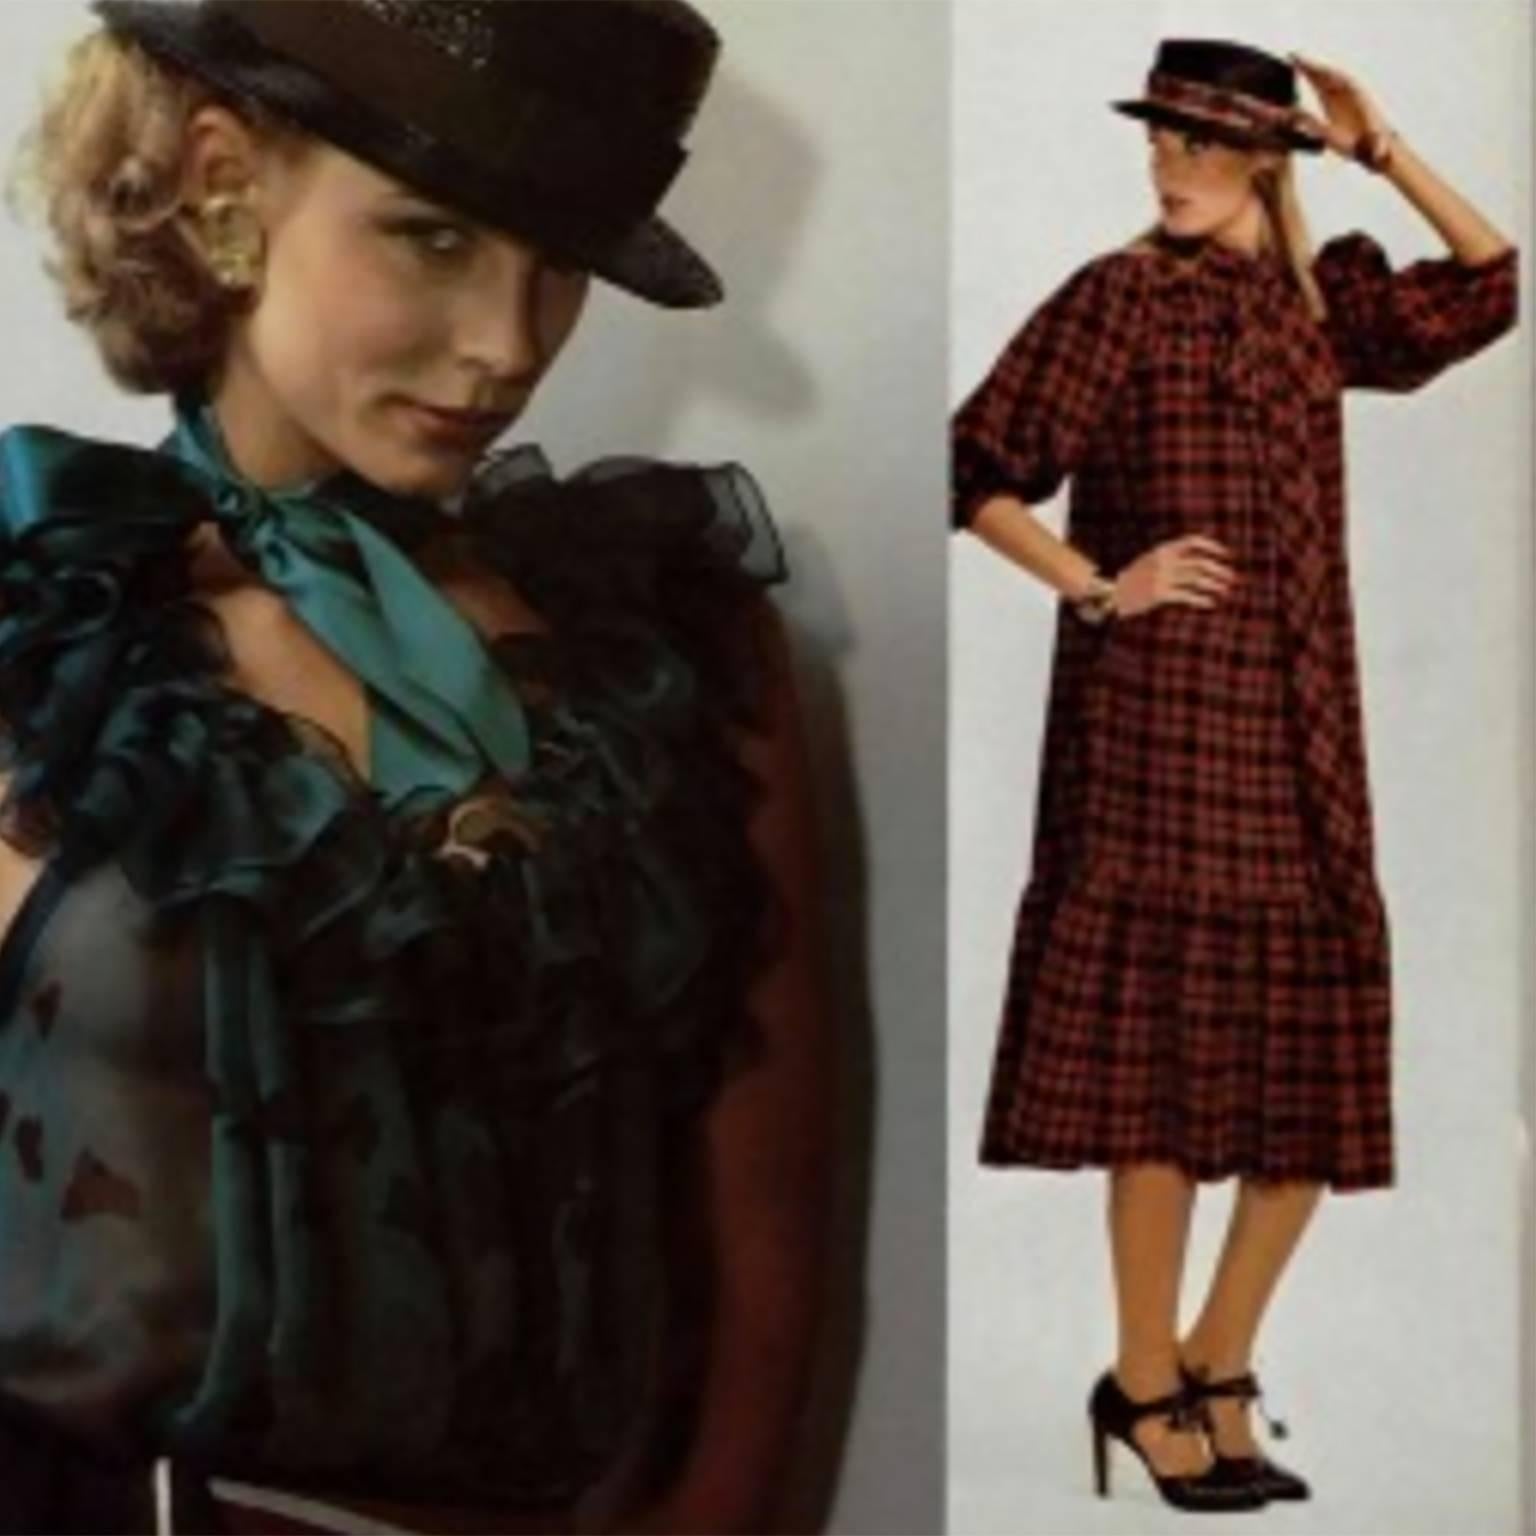 This peasant style vintage dress was designed by Yves Saint Laurent in the late 1970's. We have shown a photo from L'Officiel in 1978 with the model wearing the sash as a bow and the dress loosely. The dress is red, blue and light mustard plaid and